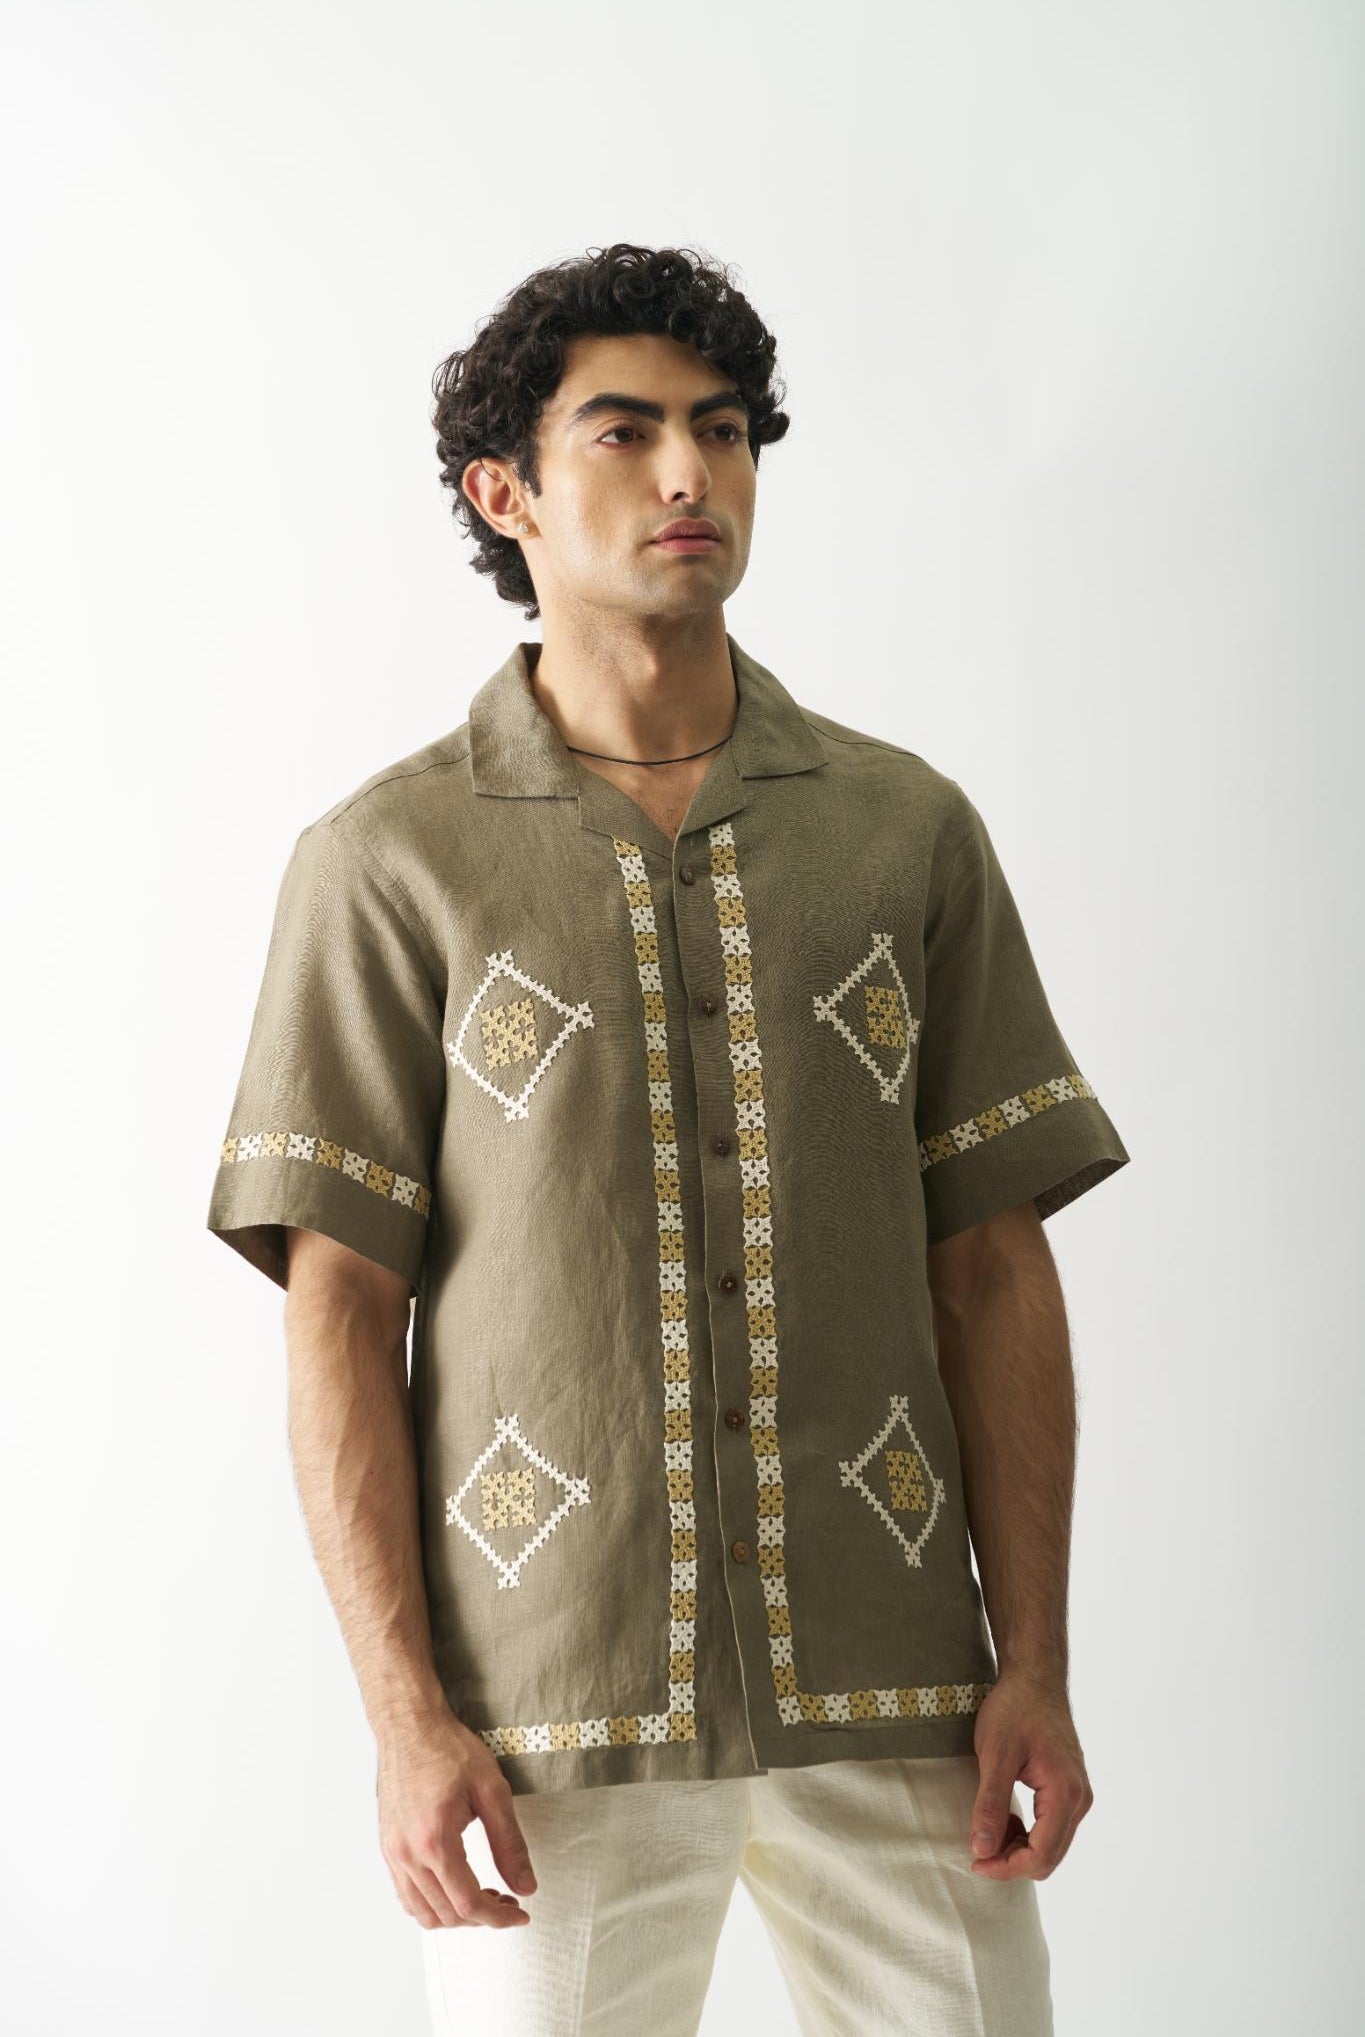 Call Me Aesthetic - Mens Hand Embroidered Pure Linen Shirt - CiceroniShirtsCultura Studio